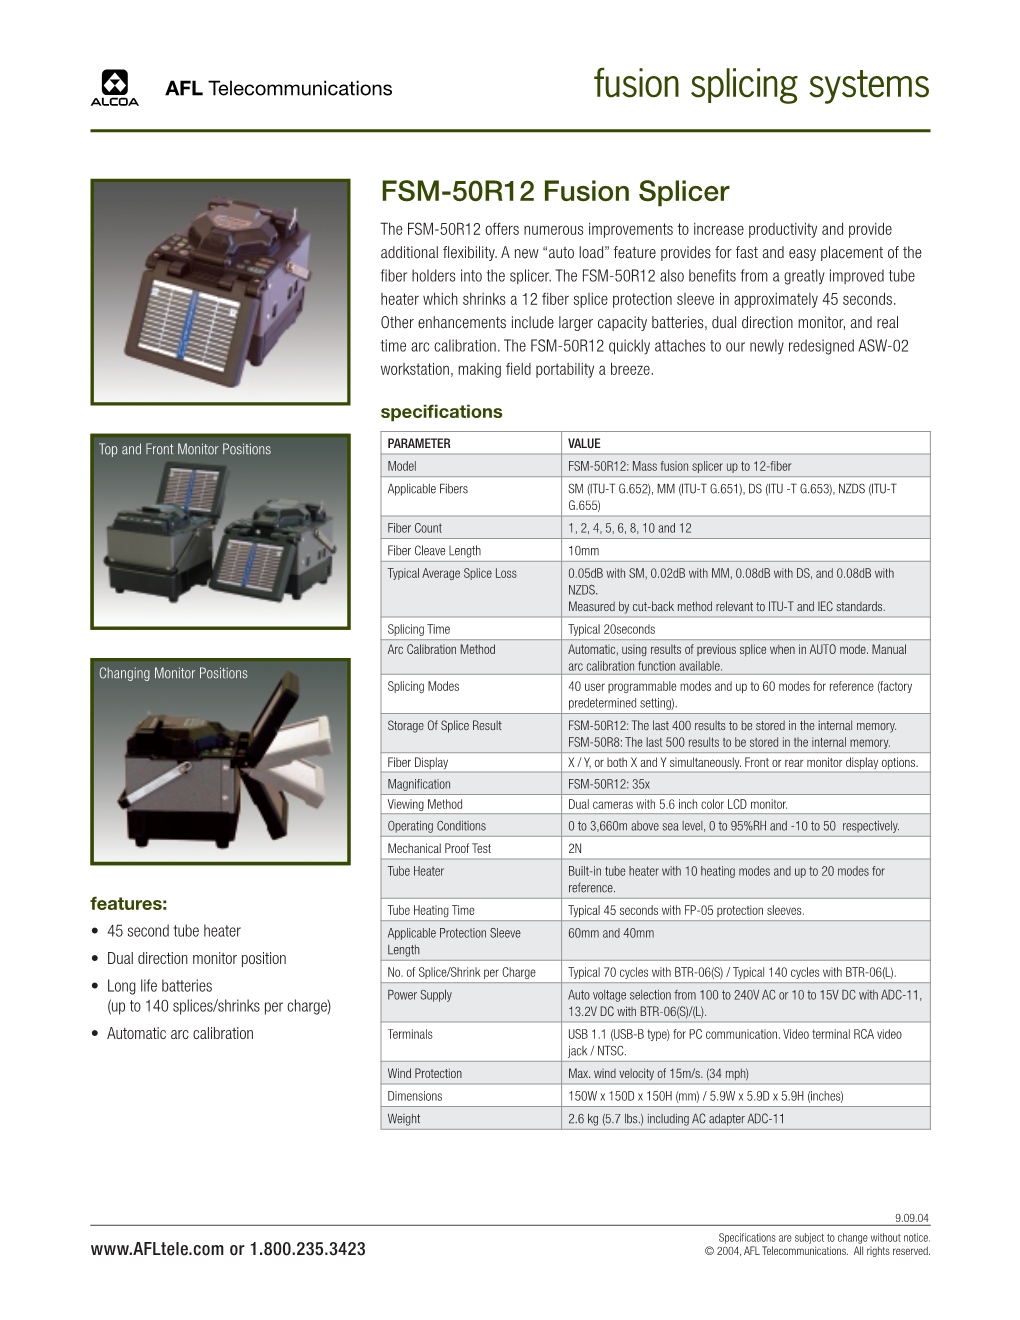 Fusion Splicing Systems